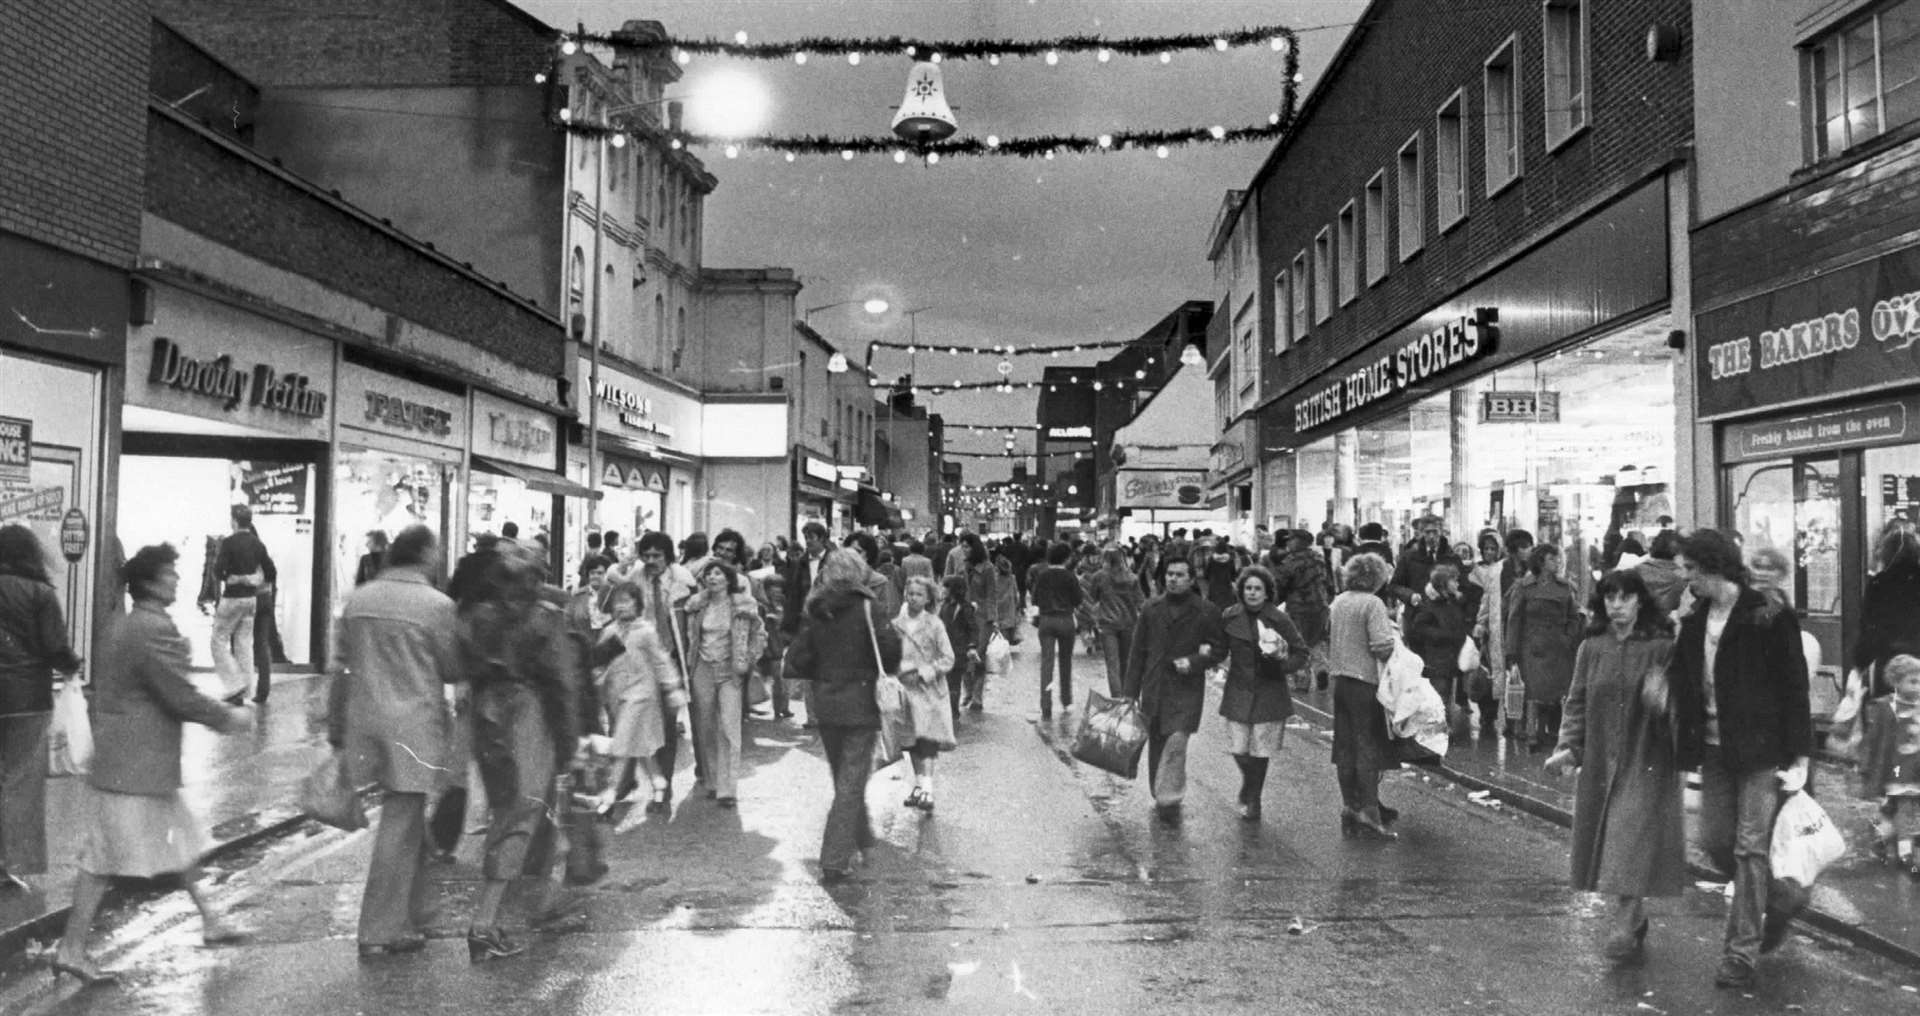 The Christmas Lights were up in Chatham in November 1980